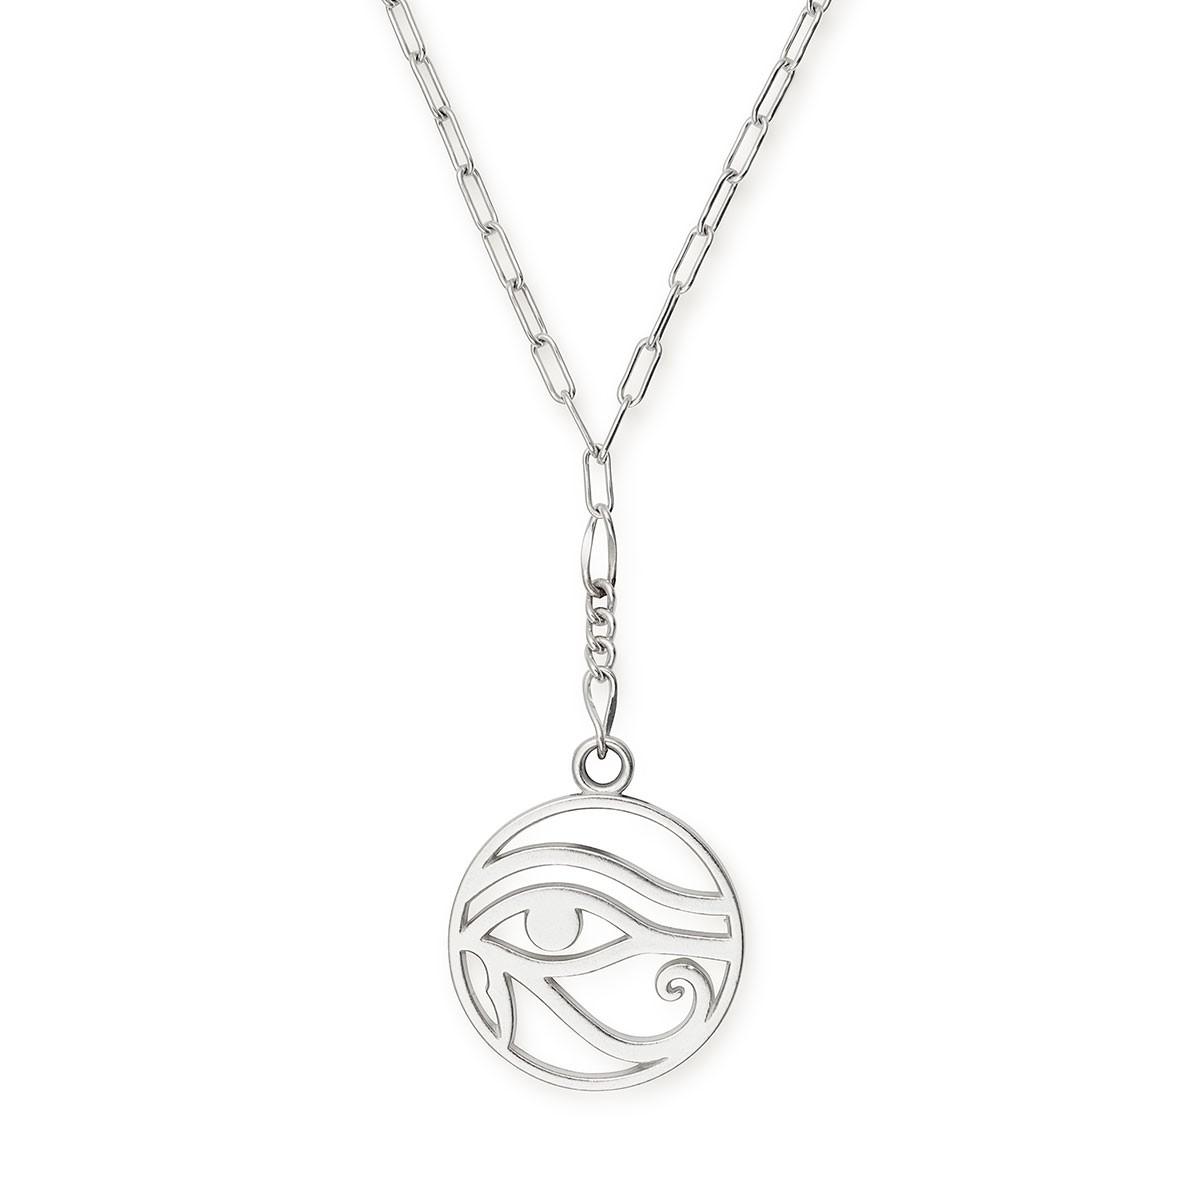 Lyst - ALEX AND ANI Eye Of Horus Adjustable Necklace in ...